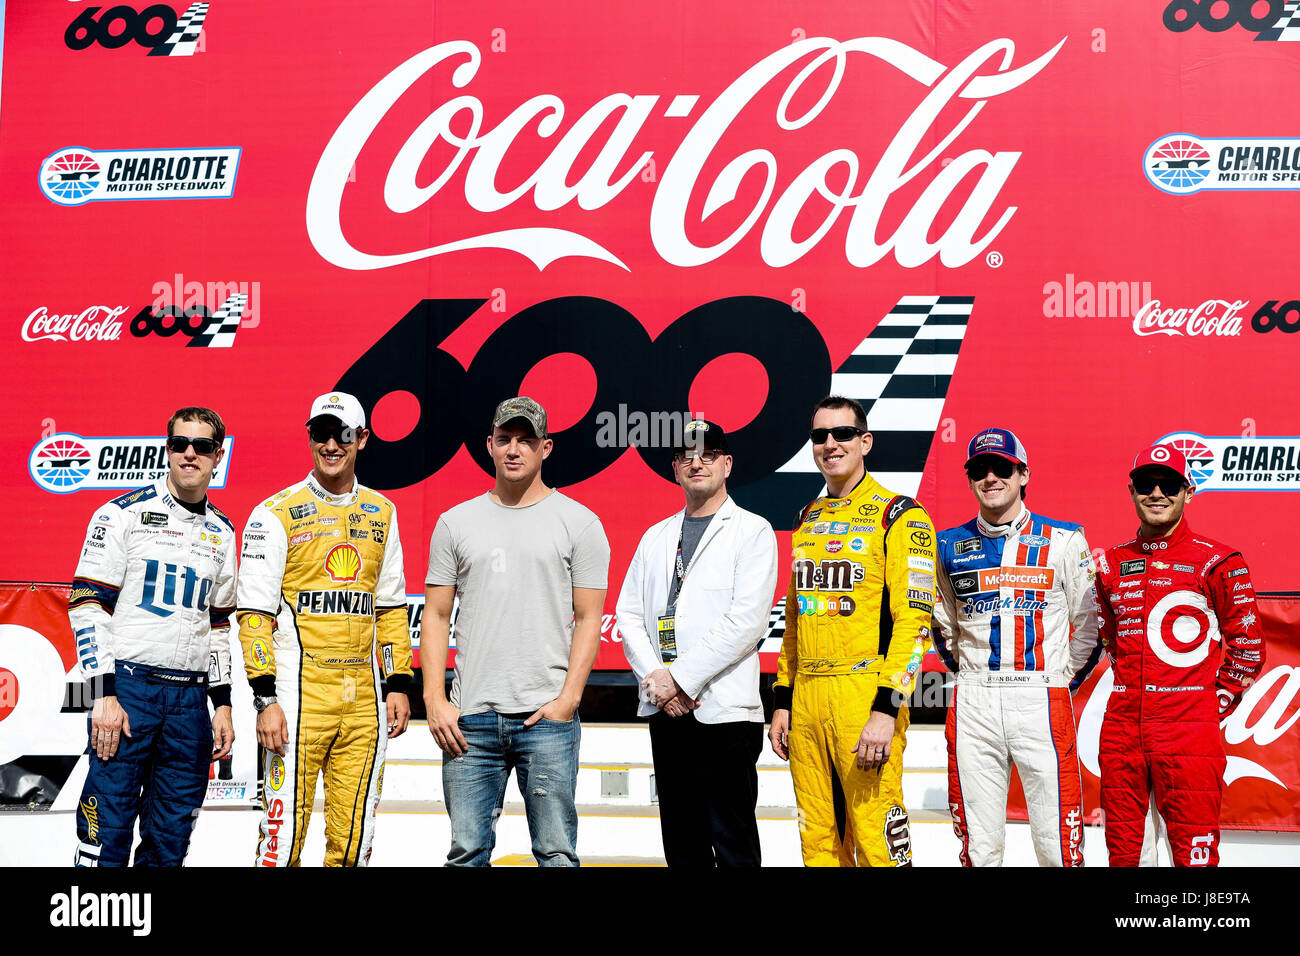 Charlotte, NC, USA. 28th May, 2017. Grand Marshall Channing Tatum and Steven Soderbergh pose with Monster Energy NASCAR Cup Series driver Brad Keselowski (2), driver Joey Logano (22), driver Kyle Busch (18) driver Ryan Blaney (21), and driver Kyle Larson (42) to promote their new movie Logan Lucky at the Coca-Cola 600 at Charlotte Motor Speedway in Charlotte, NC. (Scott Kinser/Cal Sport Media) Credit: csm/Alamy Live News Stock Photo